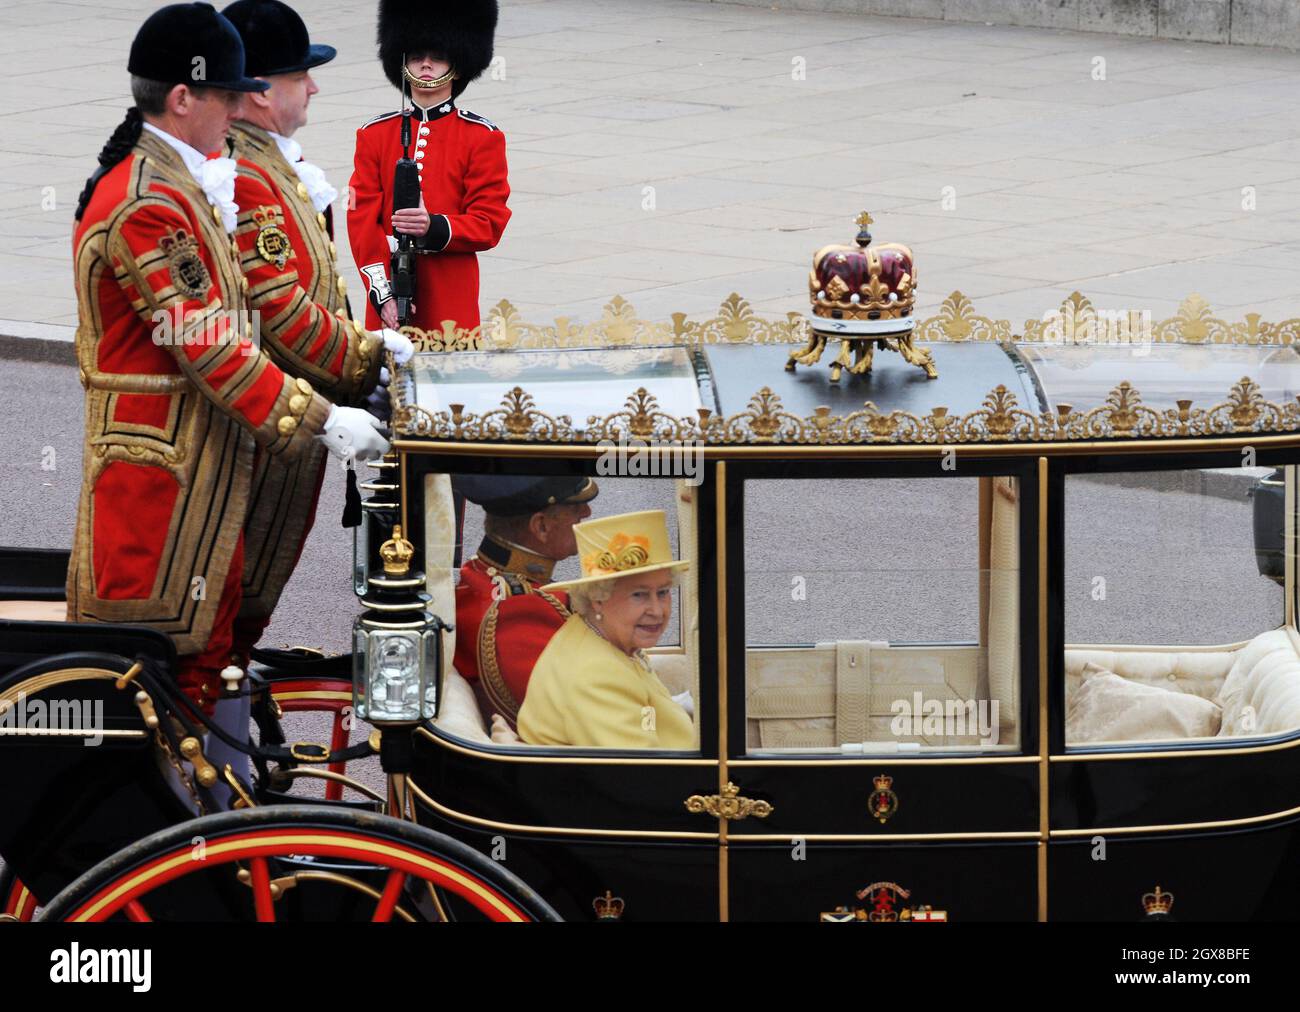 Queen Elizabeth ll and Prince Philip, Duke of Edinburgh arrive at Buckingham Palace in a coach following the wedding of Prince William and Catherine Middleton on April 29, 2011. Stock Photo